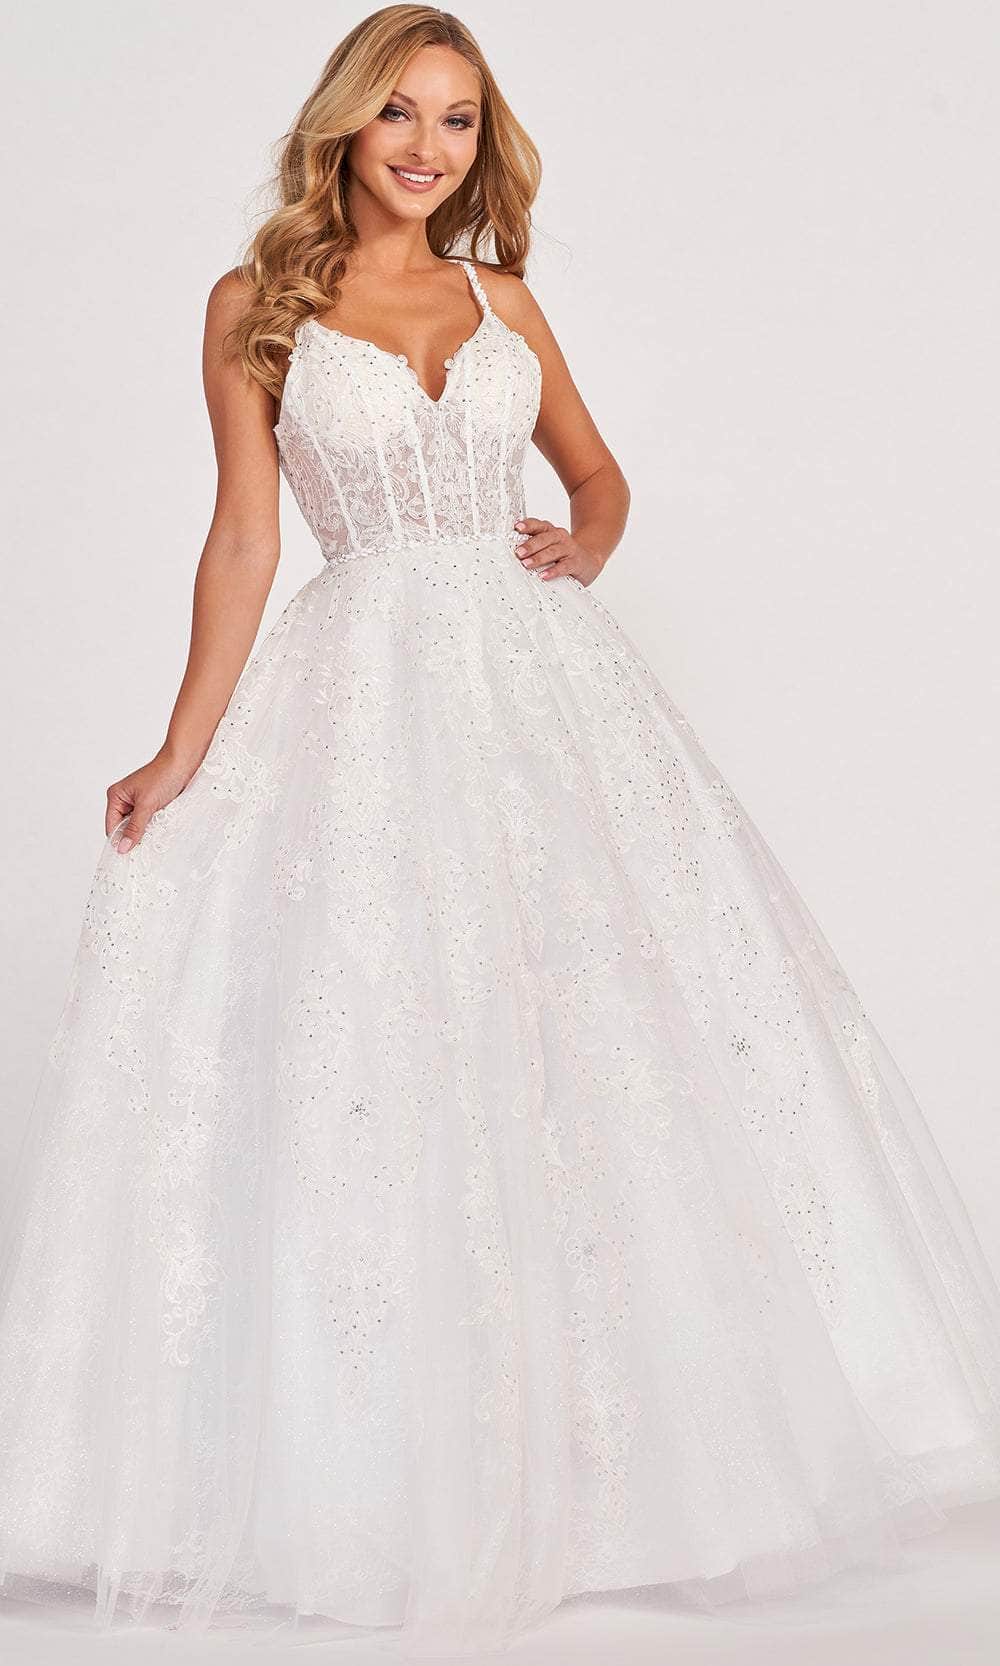 Image of Colette By Daphne CL2026 - Sleeveless Lace-Applique Ballgown